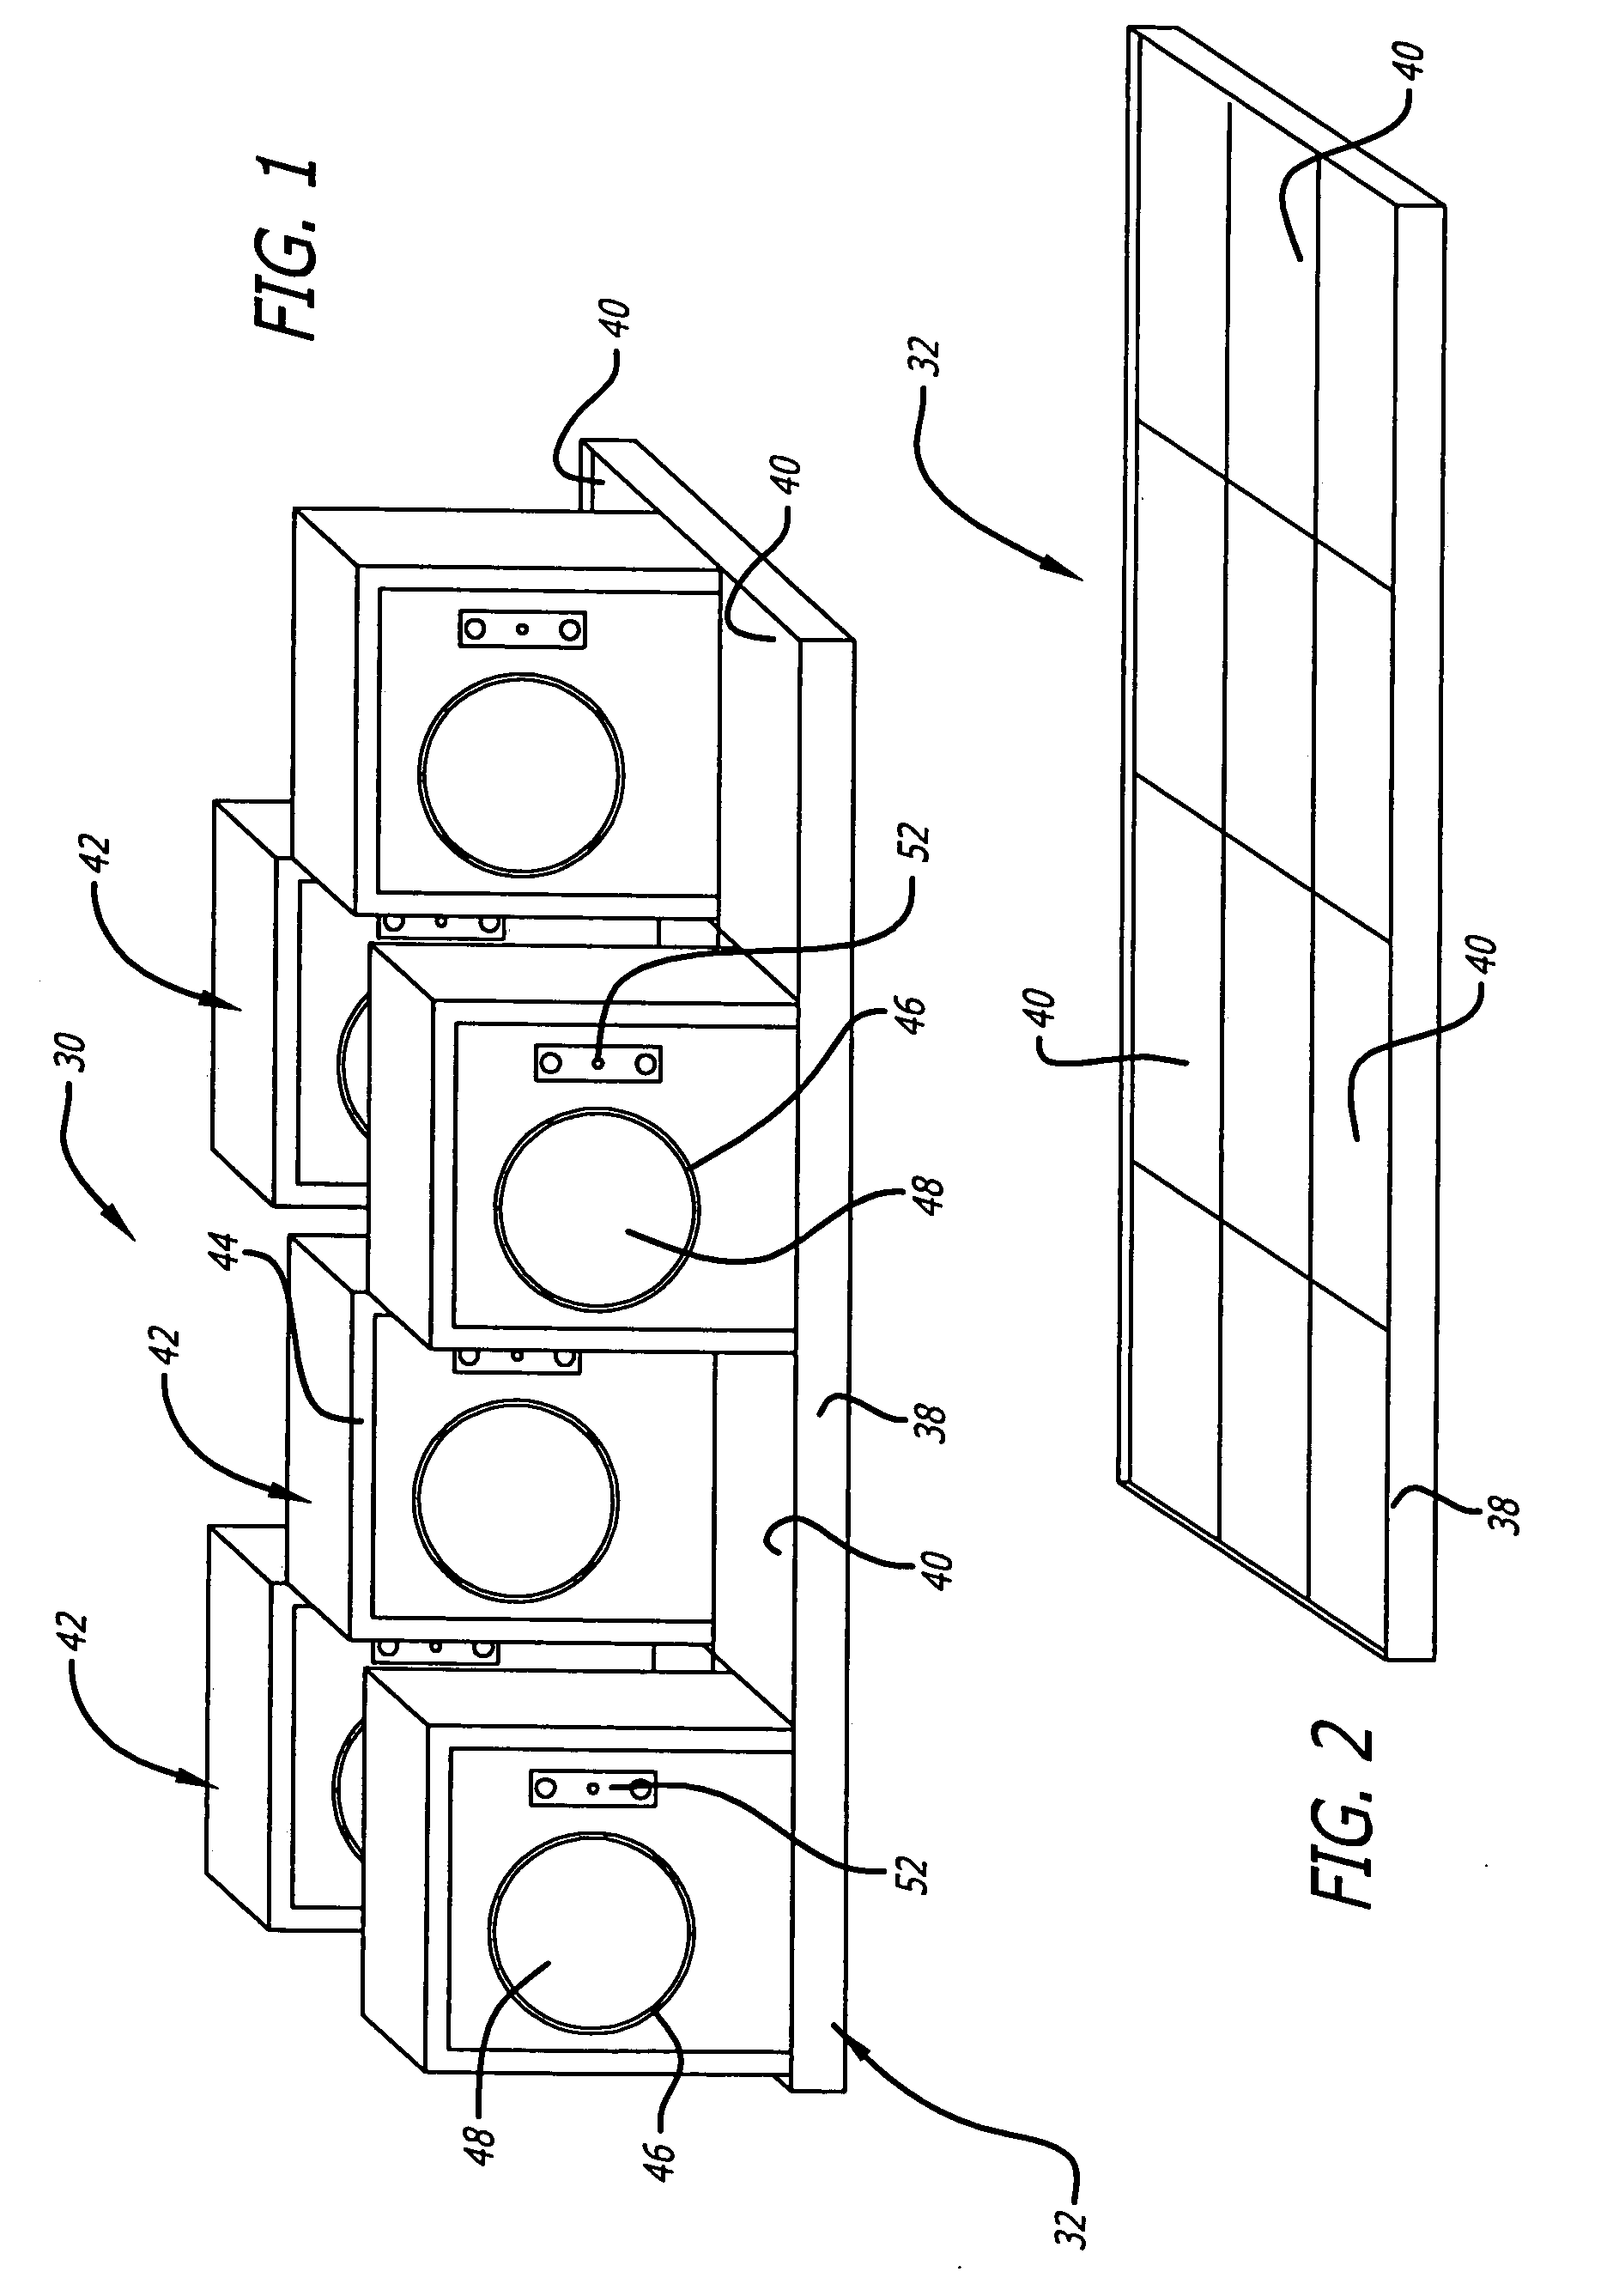 System and method for displaying self-winding watches